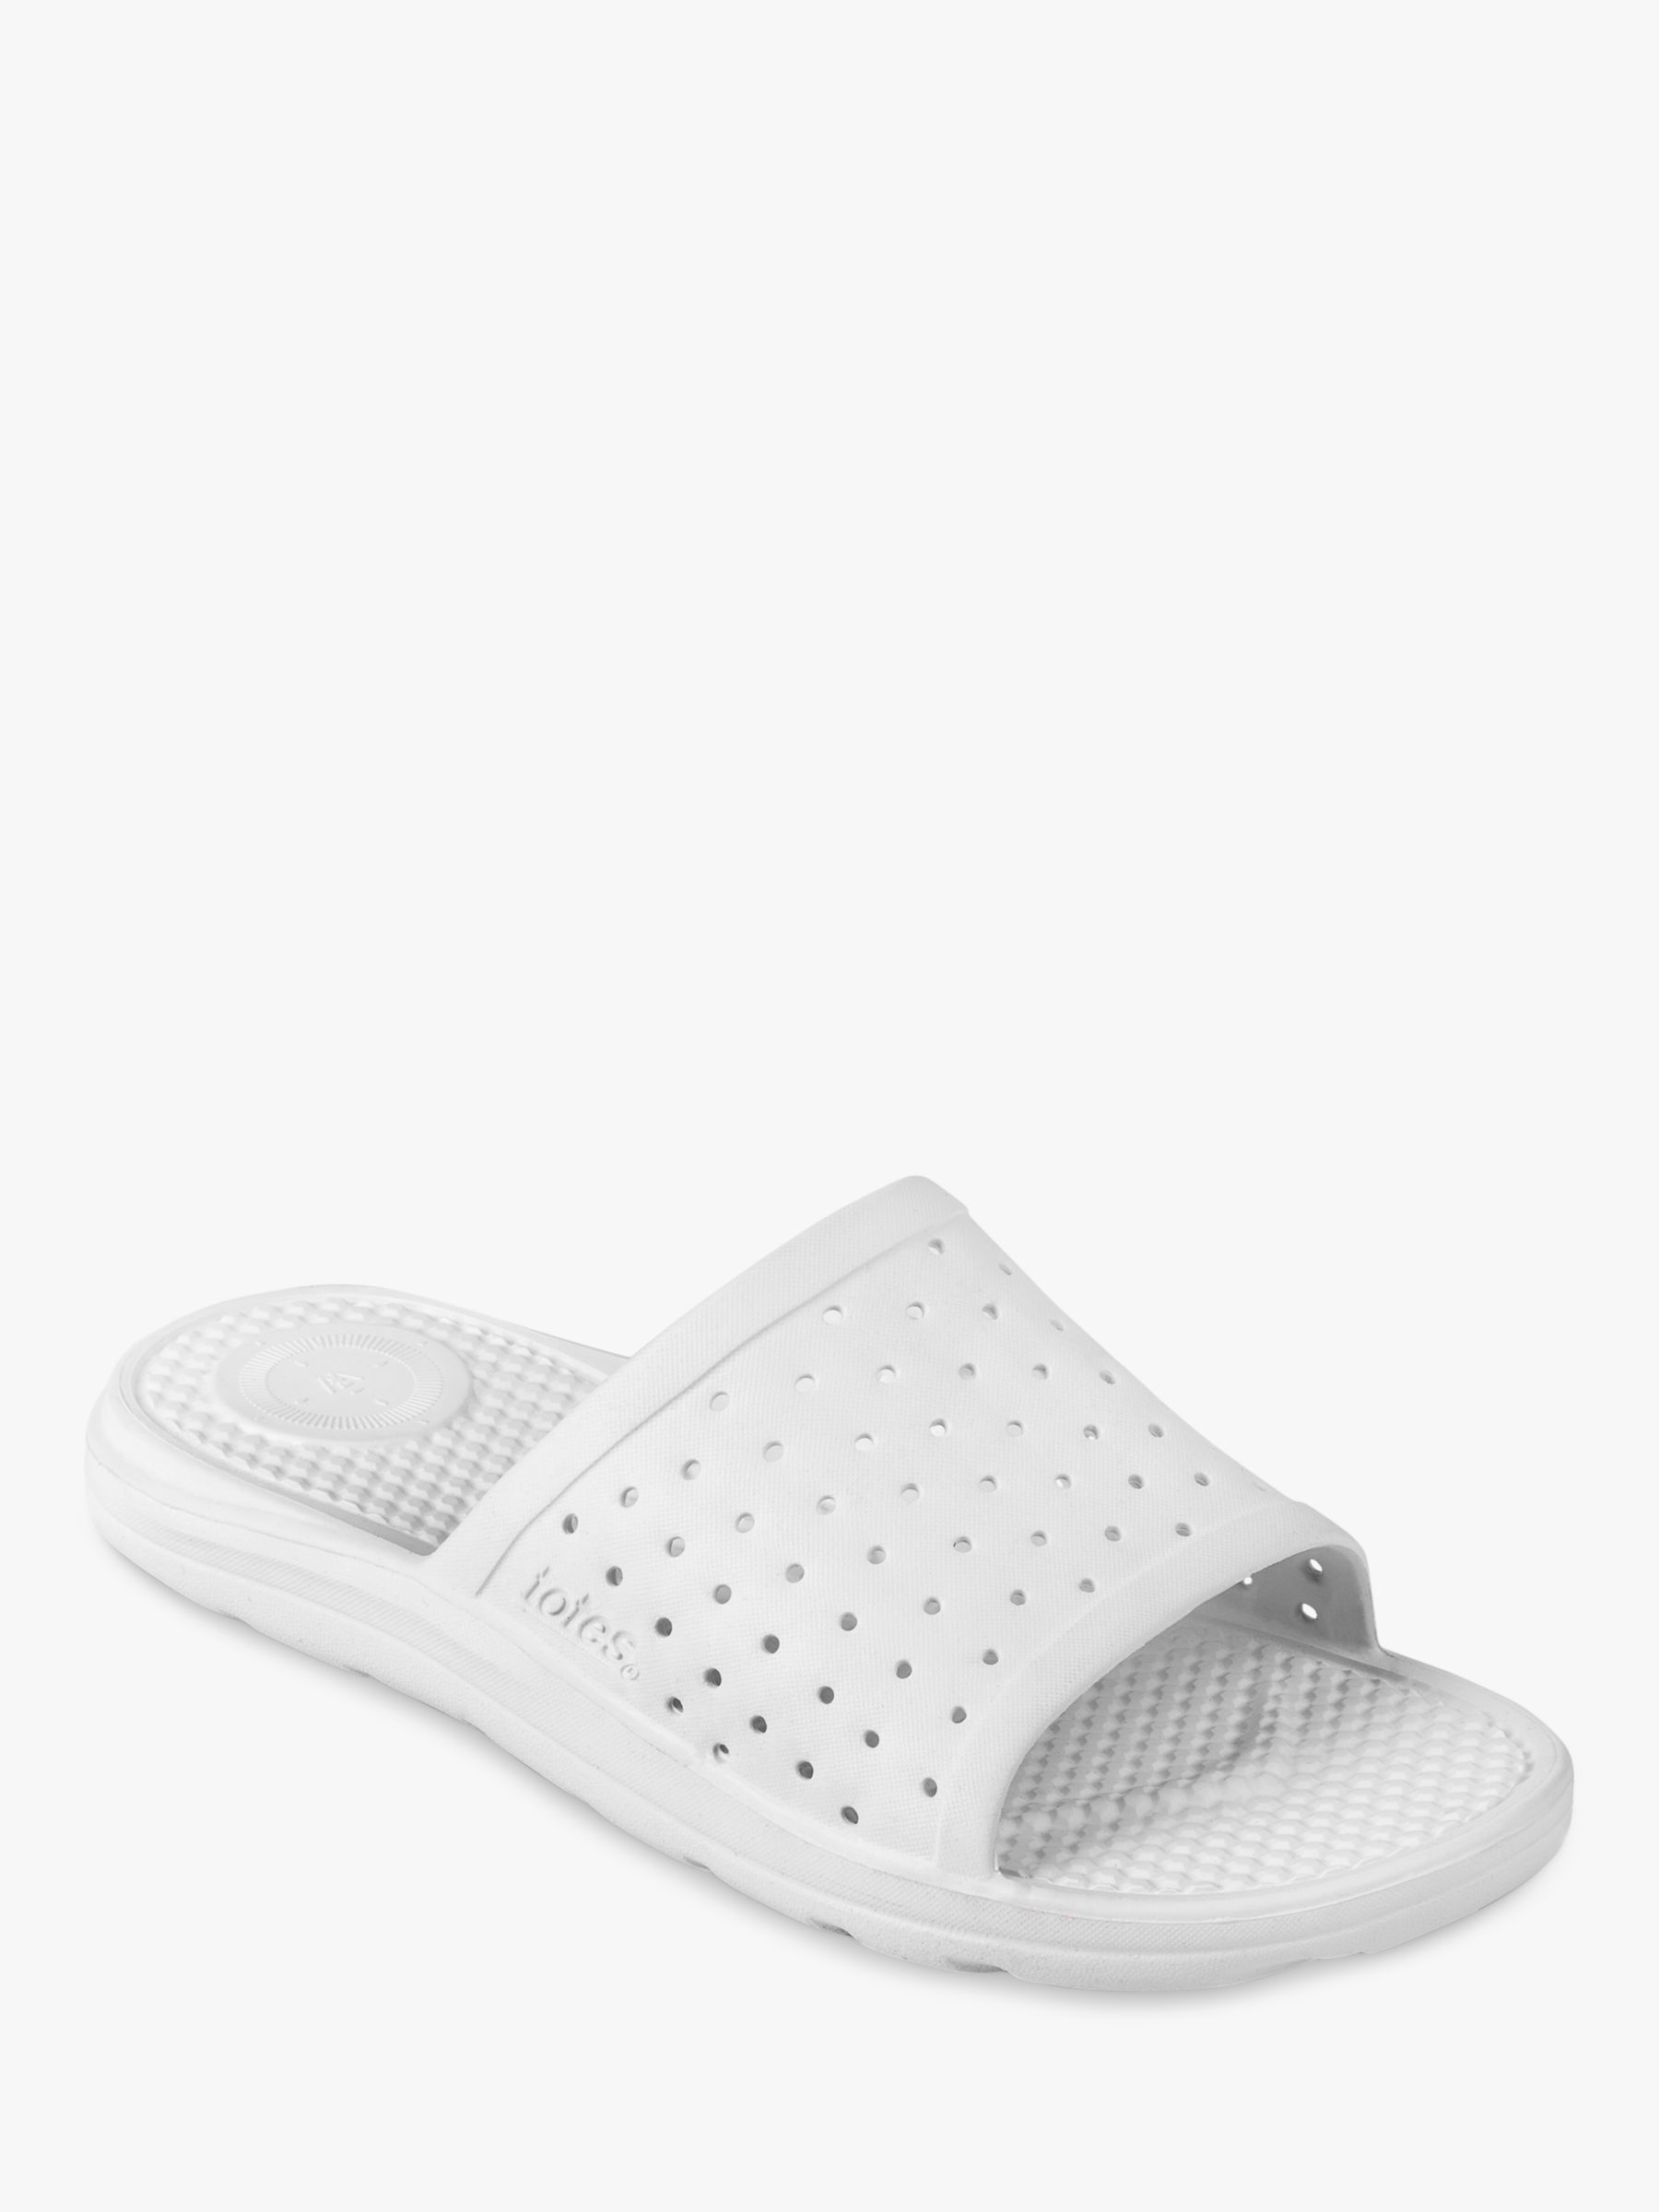 totes SOLBOUNCE Perforated Slider Sandals, White at John Lewis & Partners